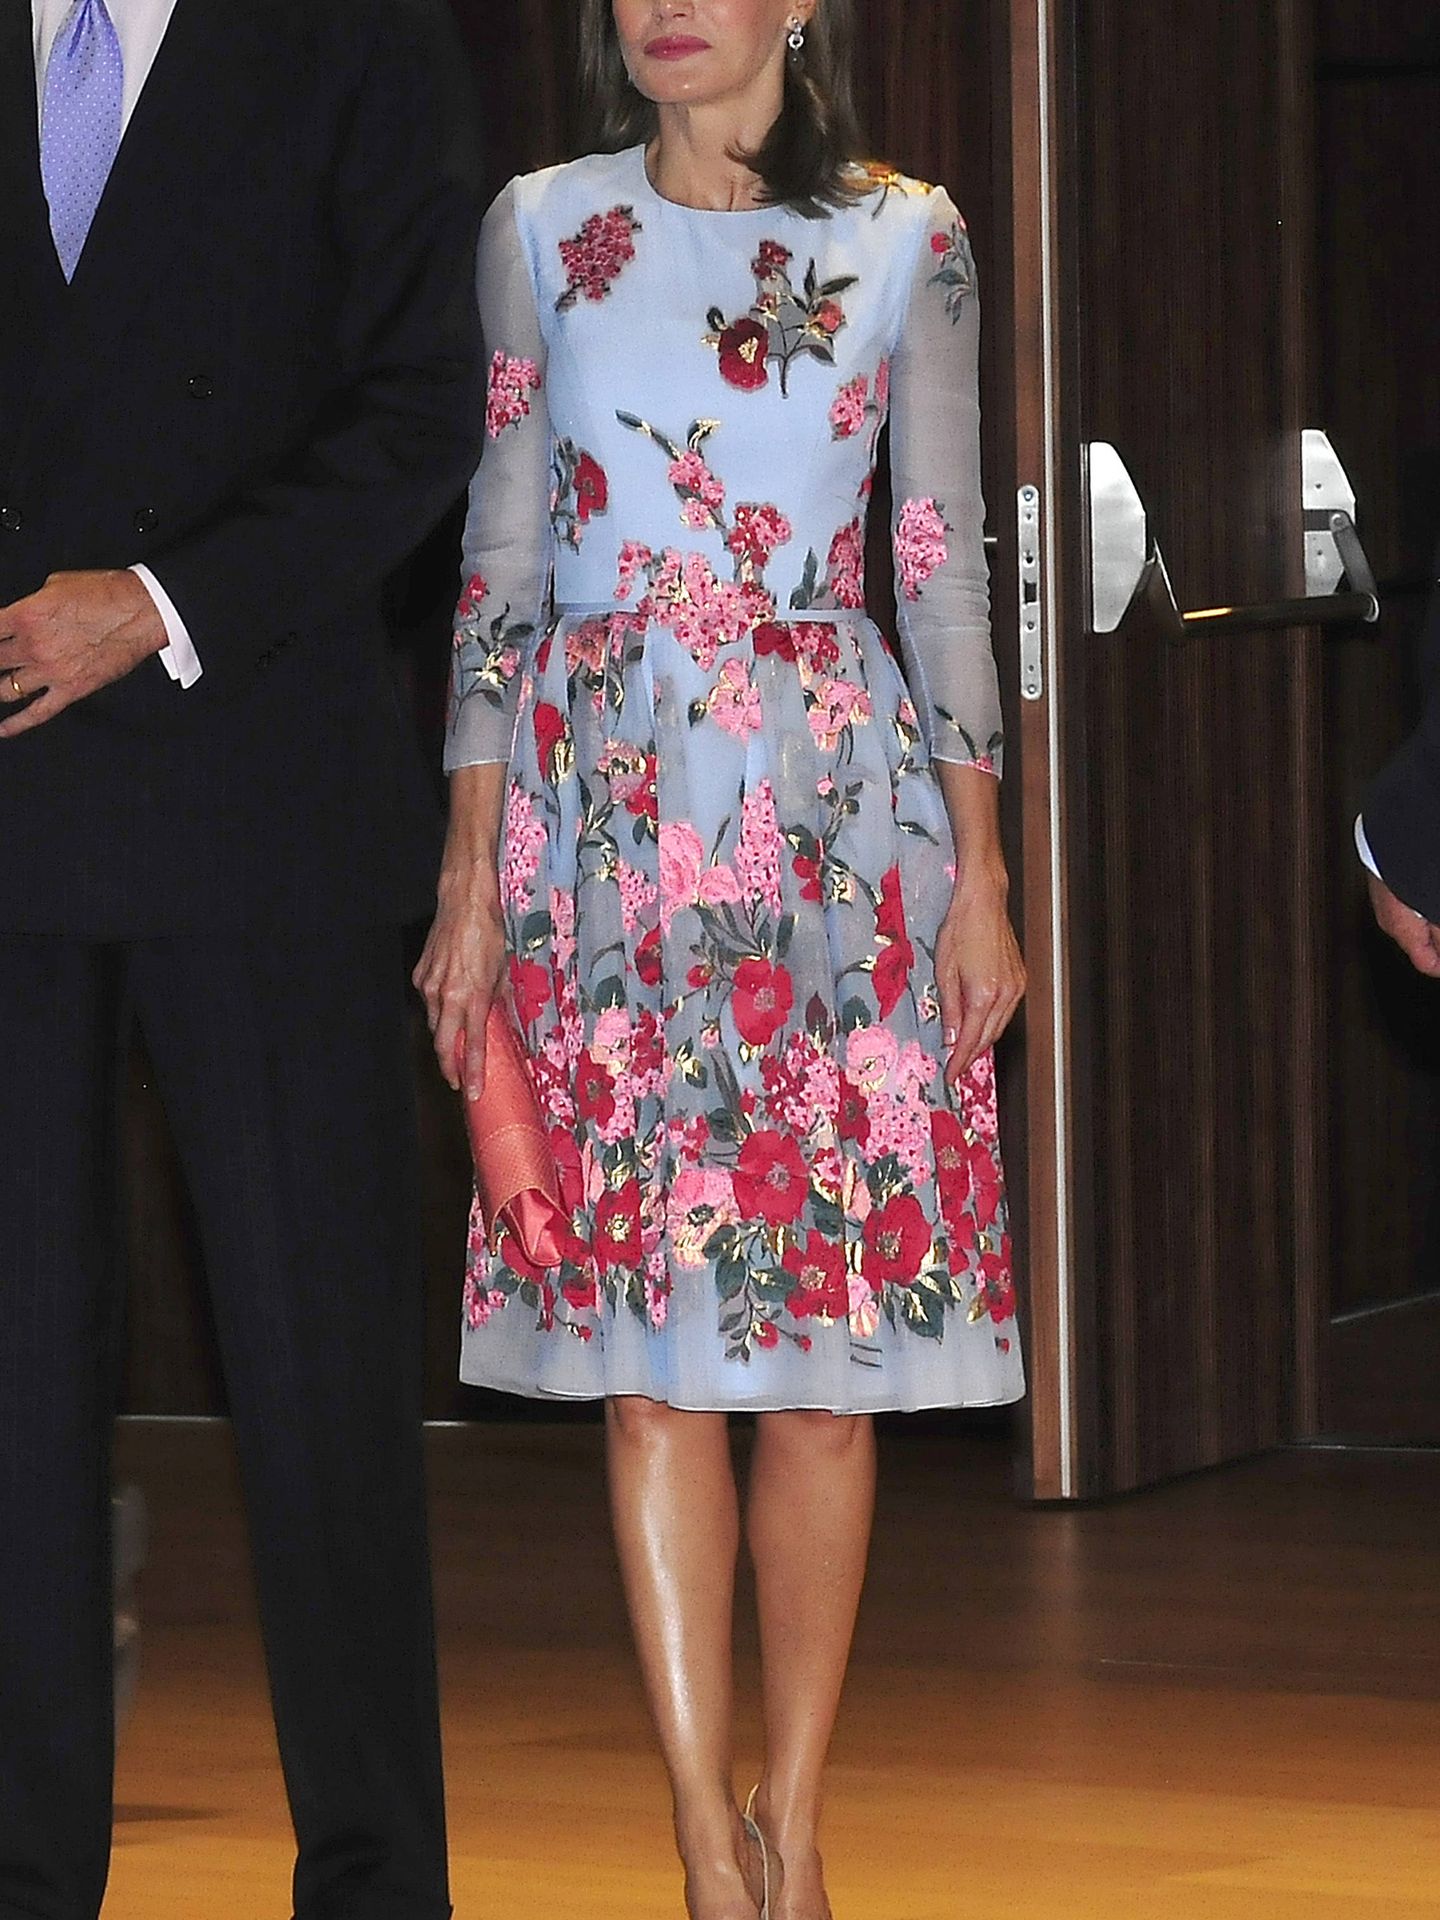 Spanish Queen Letizia during the inauguration of the new Palace of Congresses of Palma de Mallorca on Monday 25 September 2017.